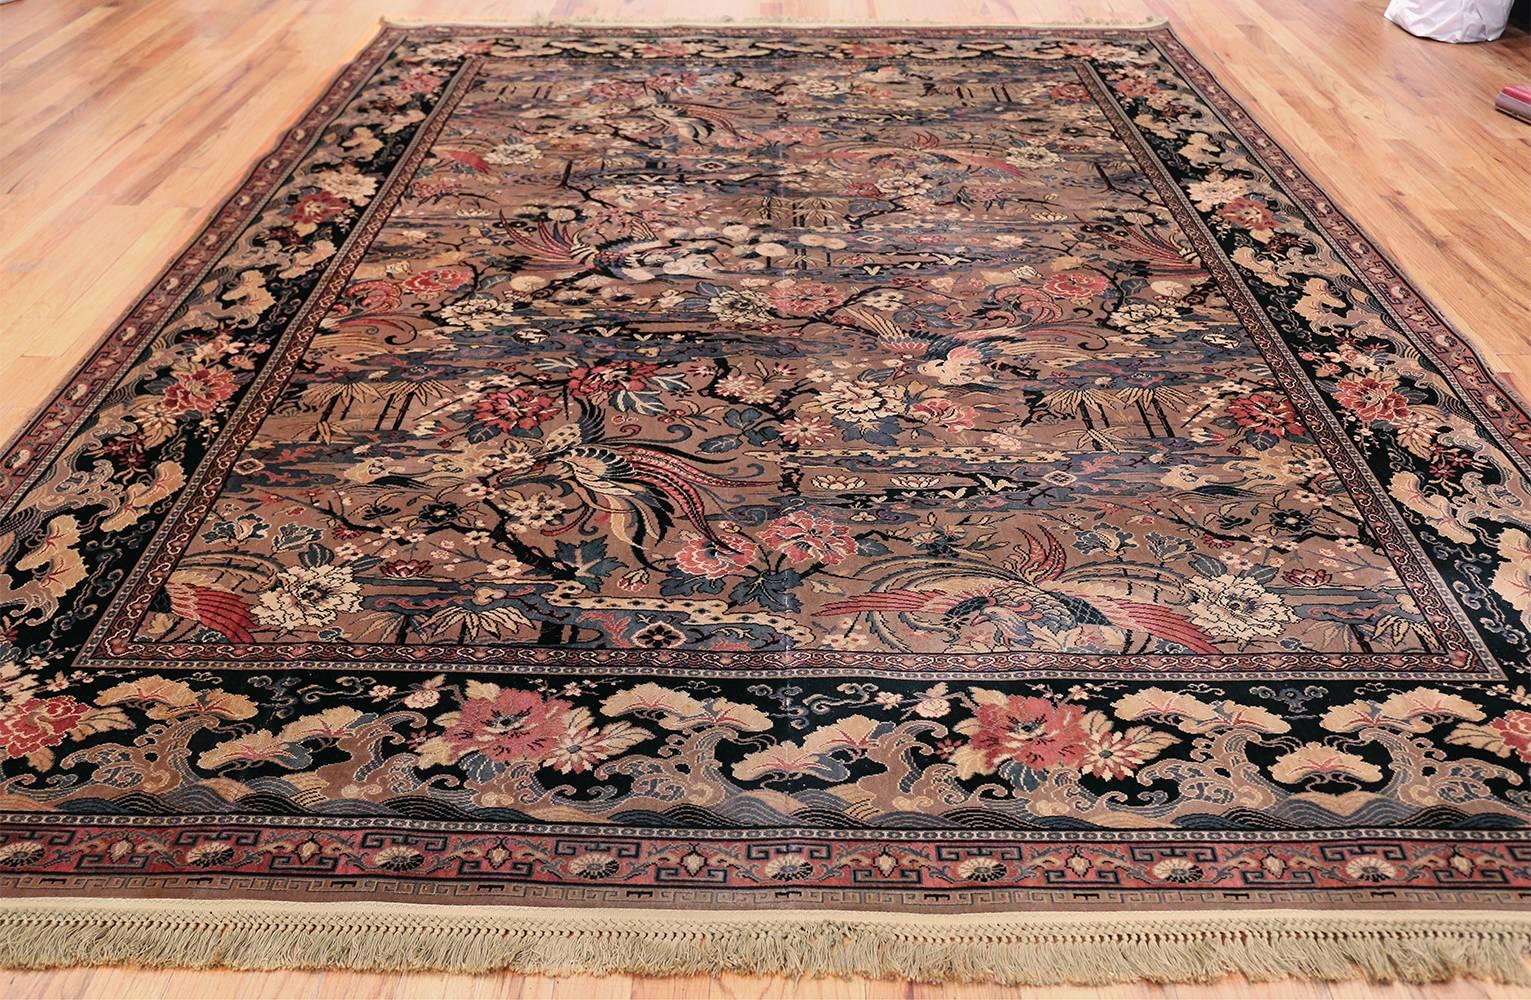 Magnificent birds of paradise vintage English Wilton rug, country of origin / rug type: English rug, Date: circa mid-20th century. Size: 9 ft x 11 ft 10 in (2.74 m x 3.61 m)

This is a beautiful birds of paradise design English Wilton rug is one of